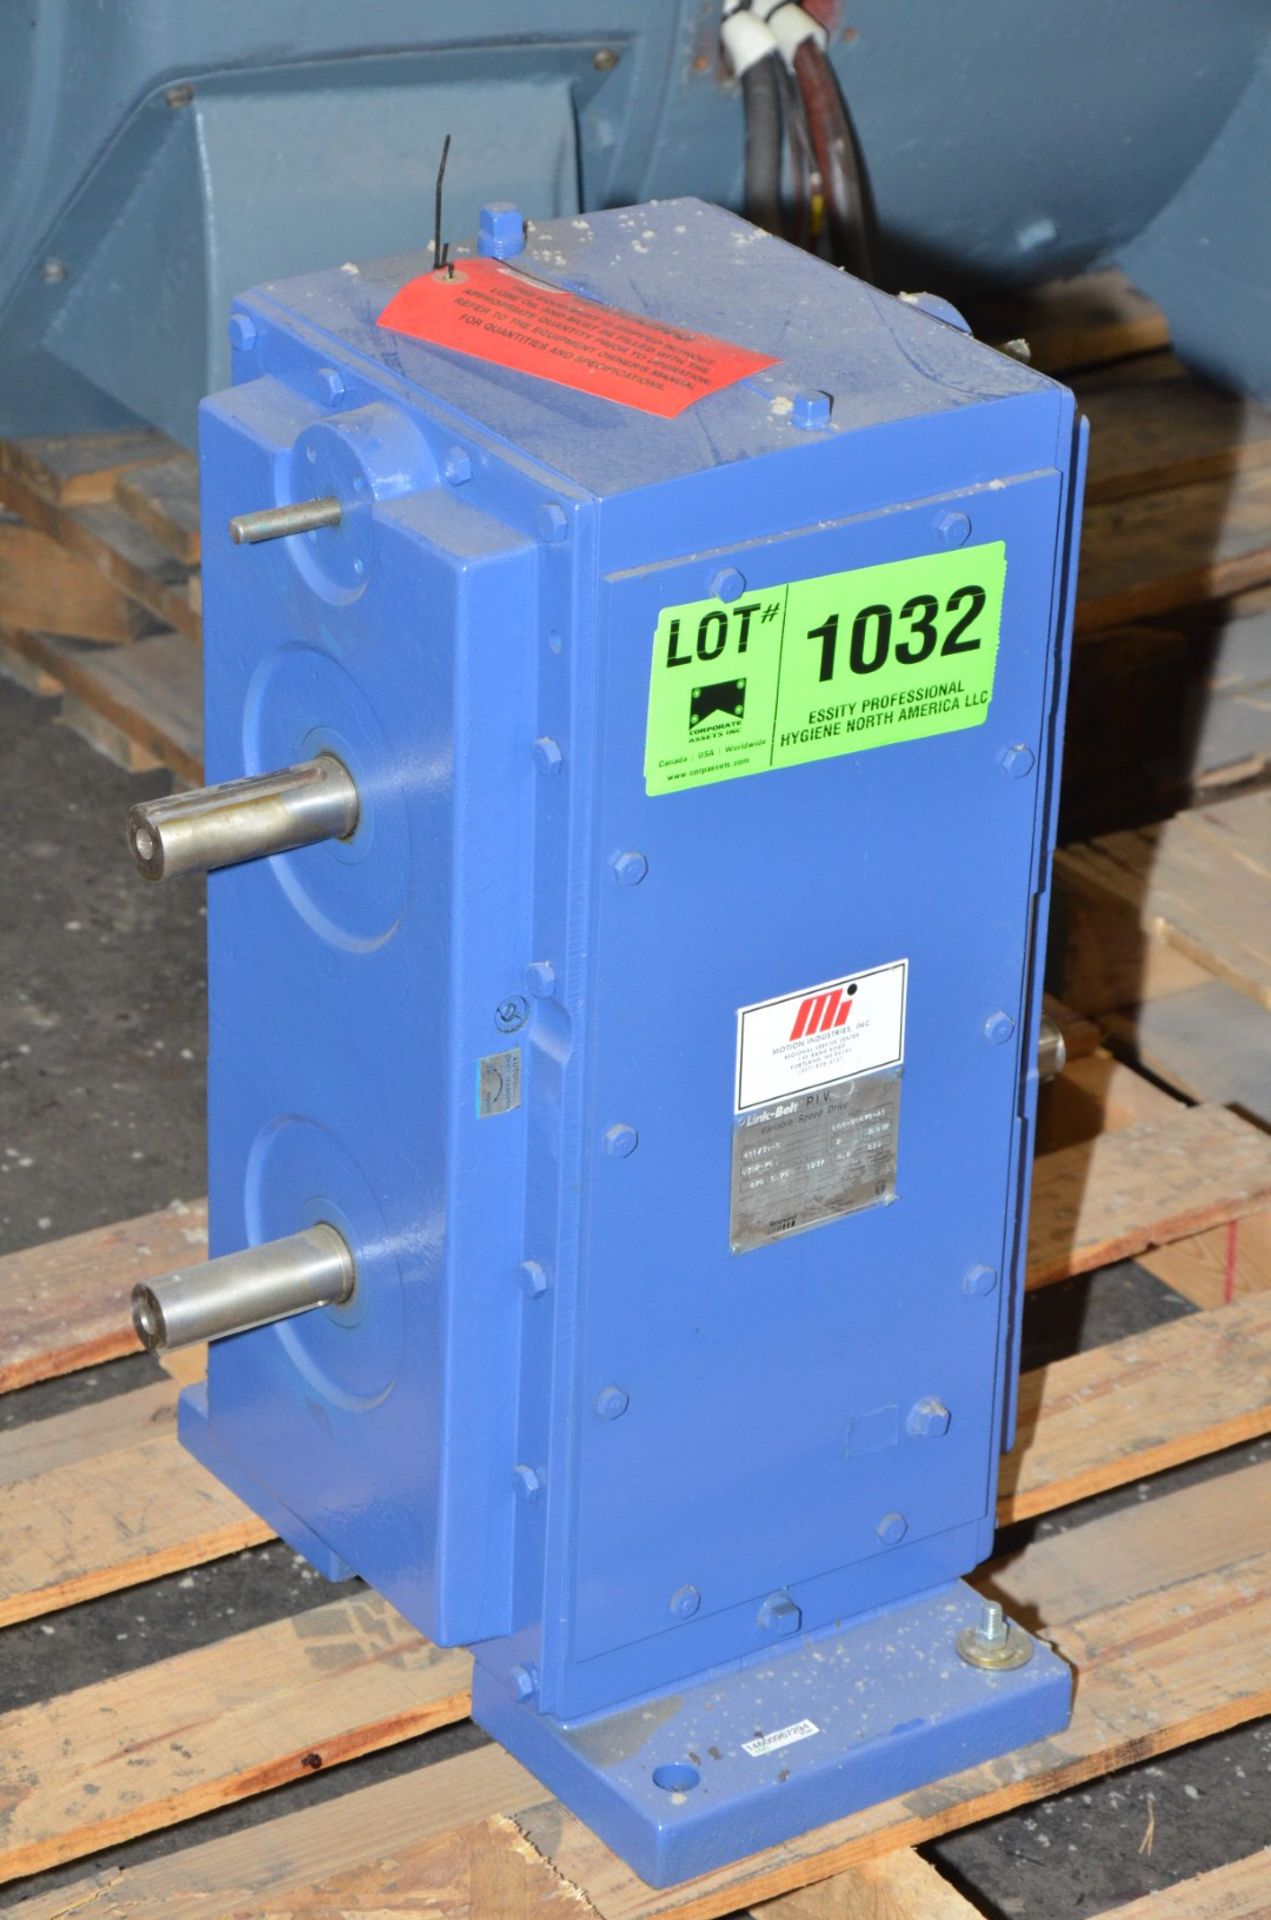 LINK-BELT 411Z390-S REXNORD VARIABLE SPEED DRIVE, 6.75 HP @ 1237 RATING, S/N L04-50478-A1 [RIGGING - Image 2 of 3